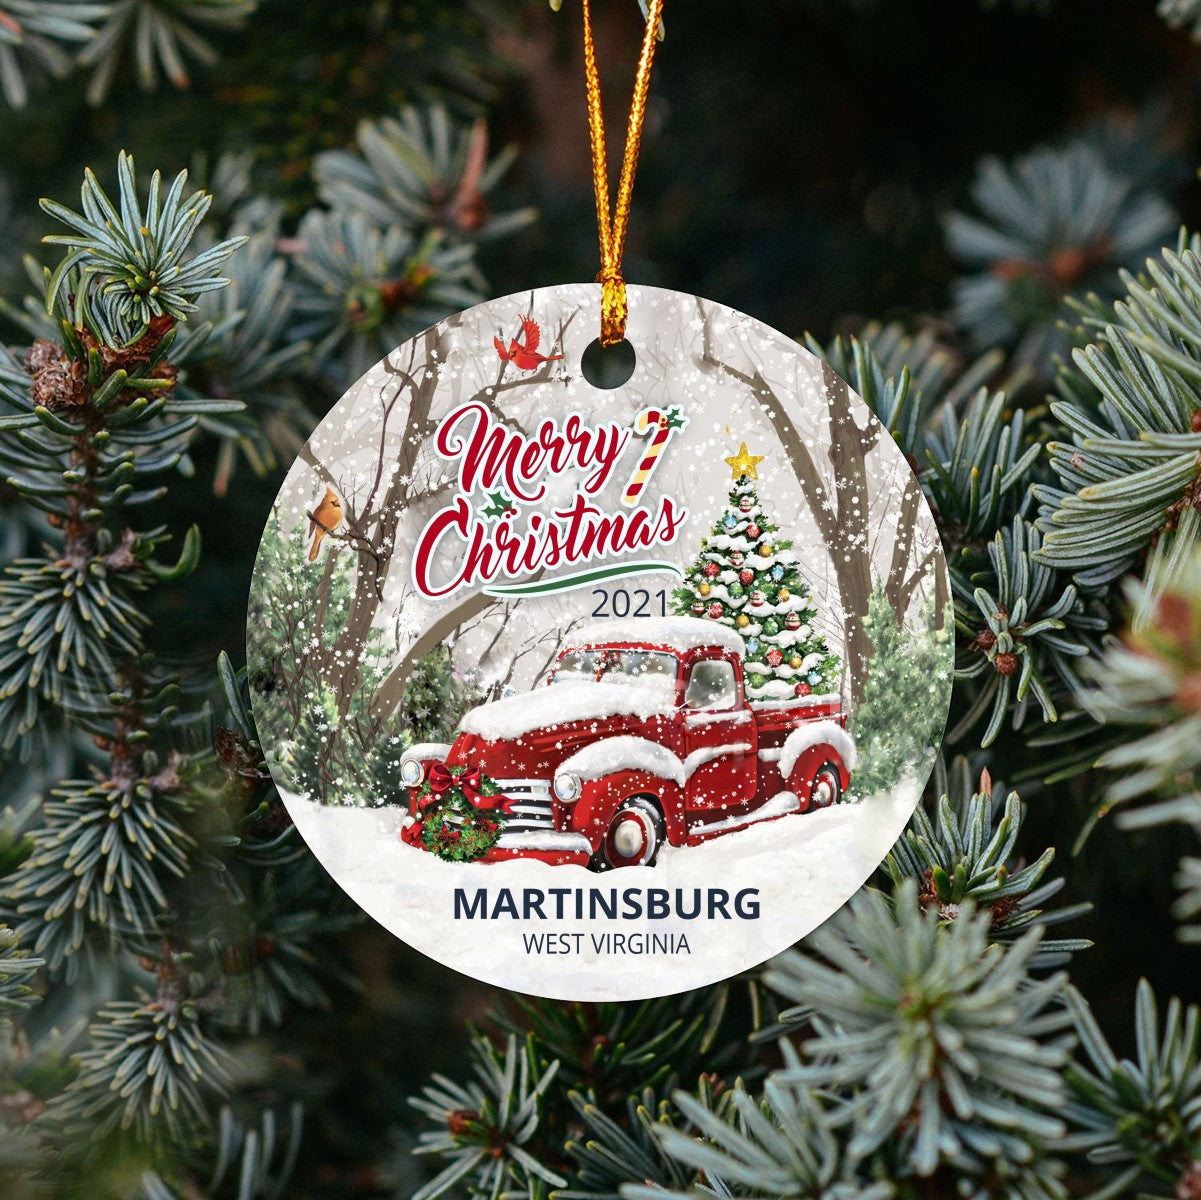 Christmas Tree Ornaments Martinsburg - Ornament Customize With Name City And State Martinsburg West Virginia WV - Red Truck Xmas Ornaments 3'' Plastic Gift For Family, Friend And Housewarming